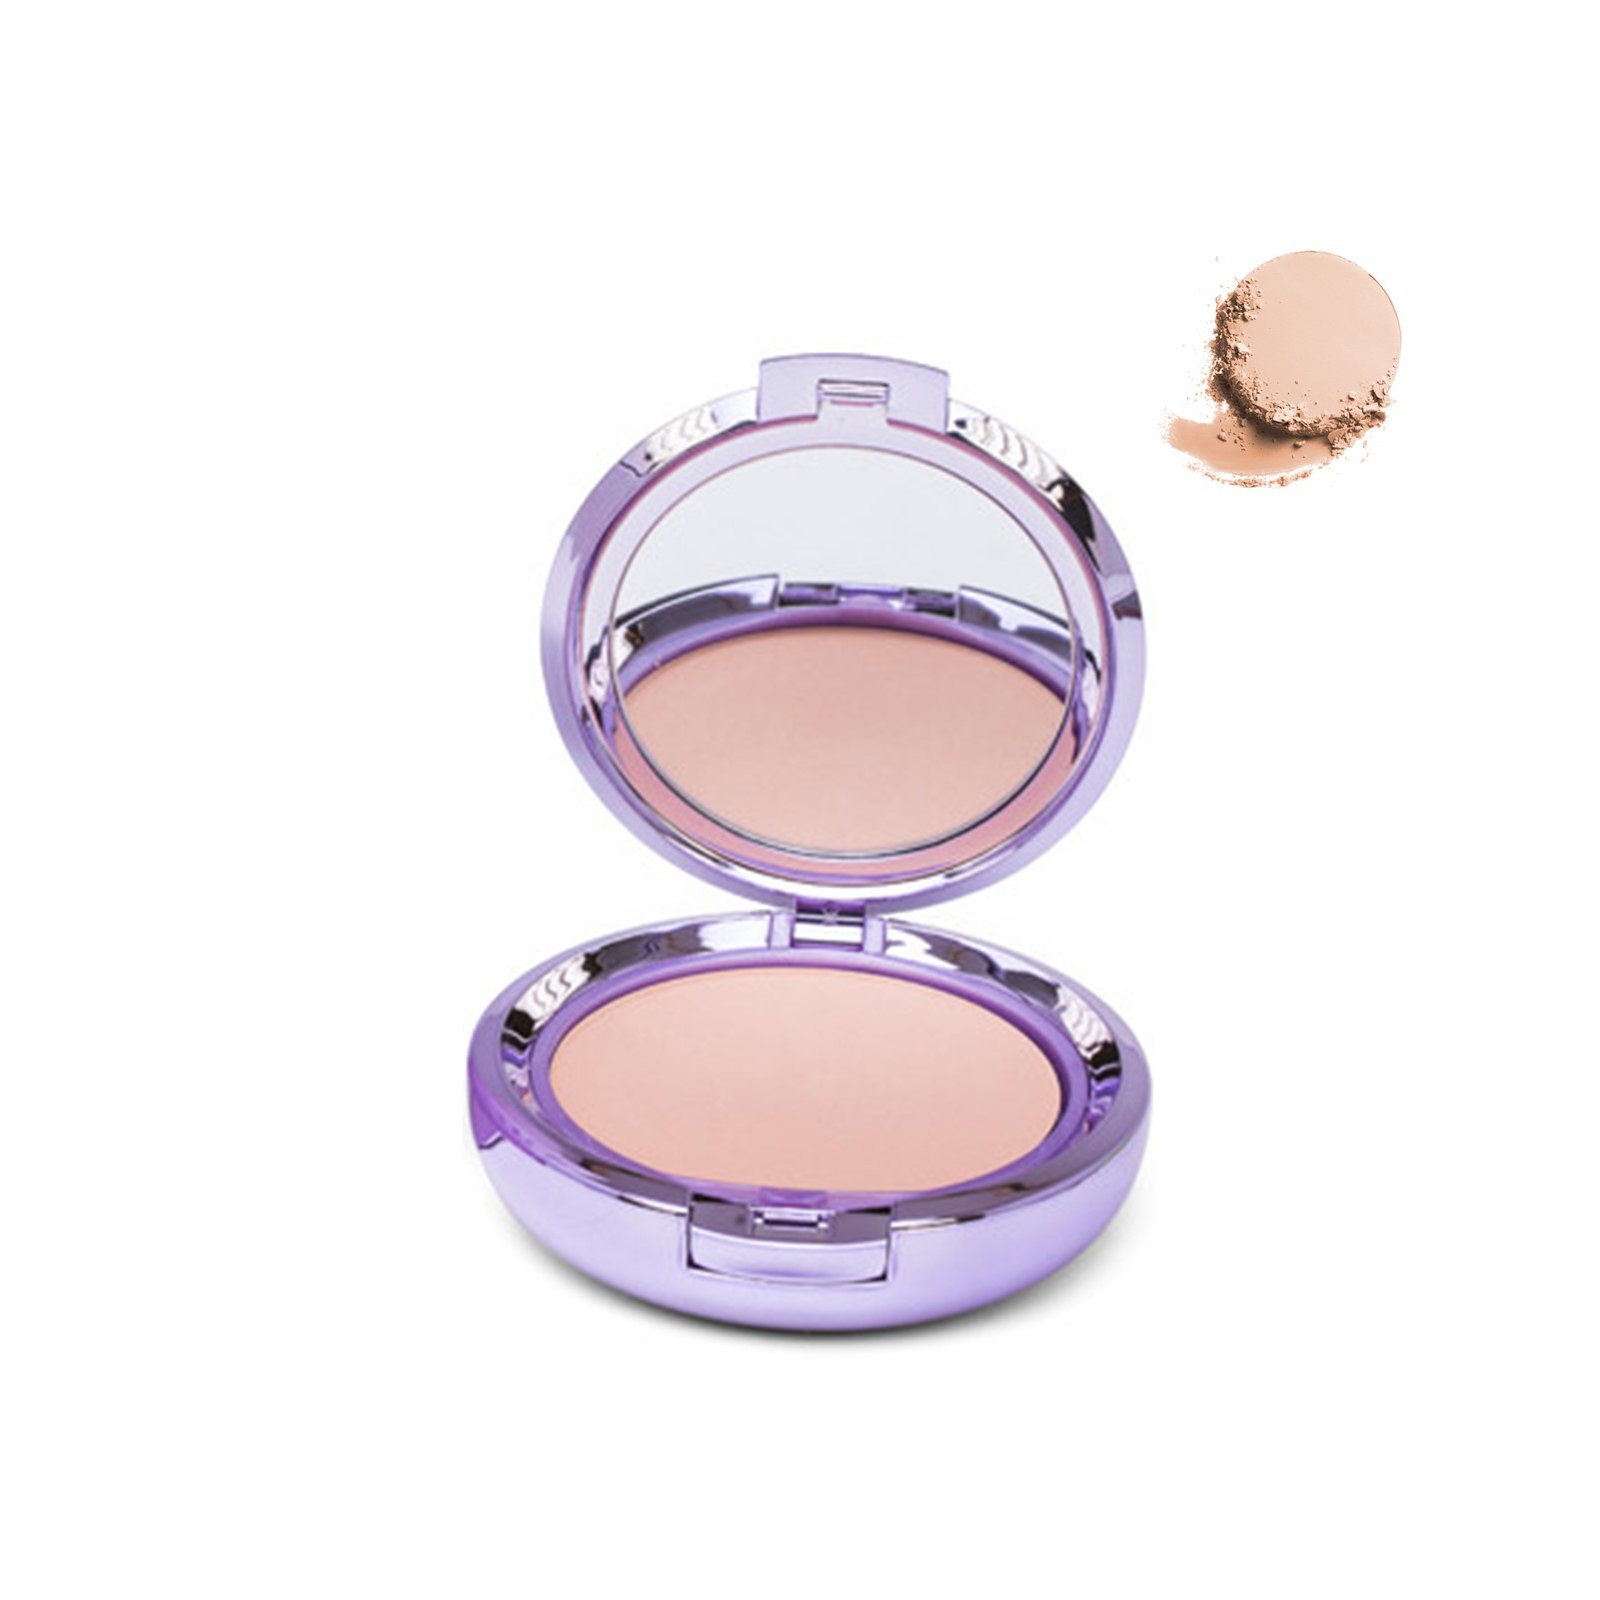 Covermark Compact Powder Normal Skin 4 10g